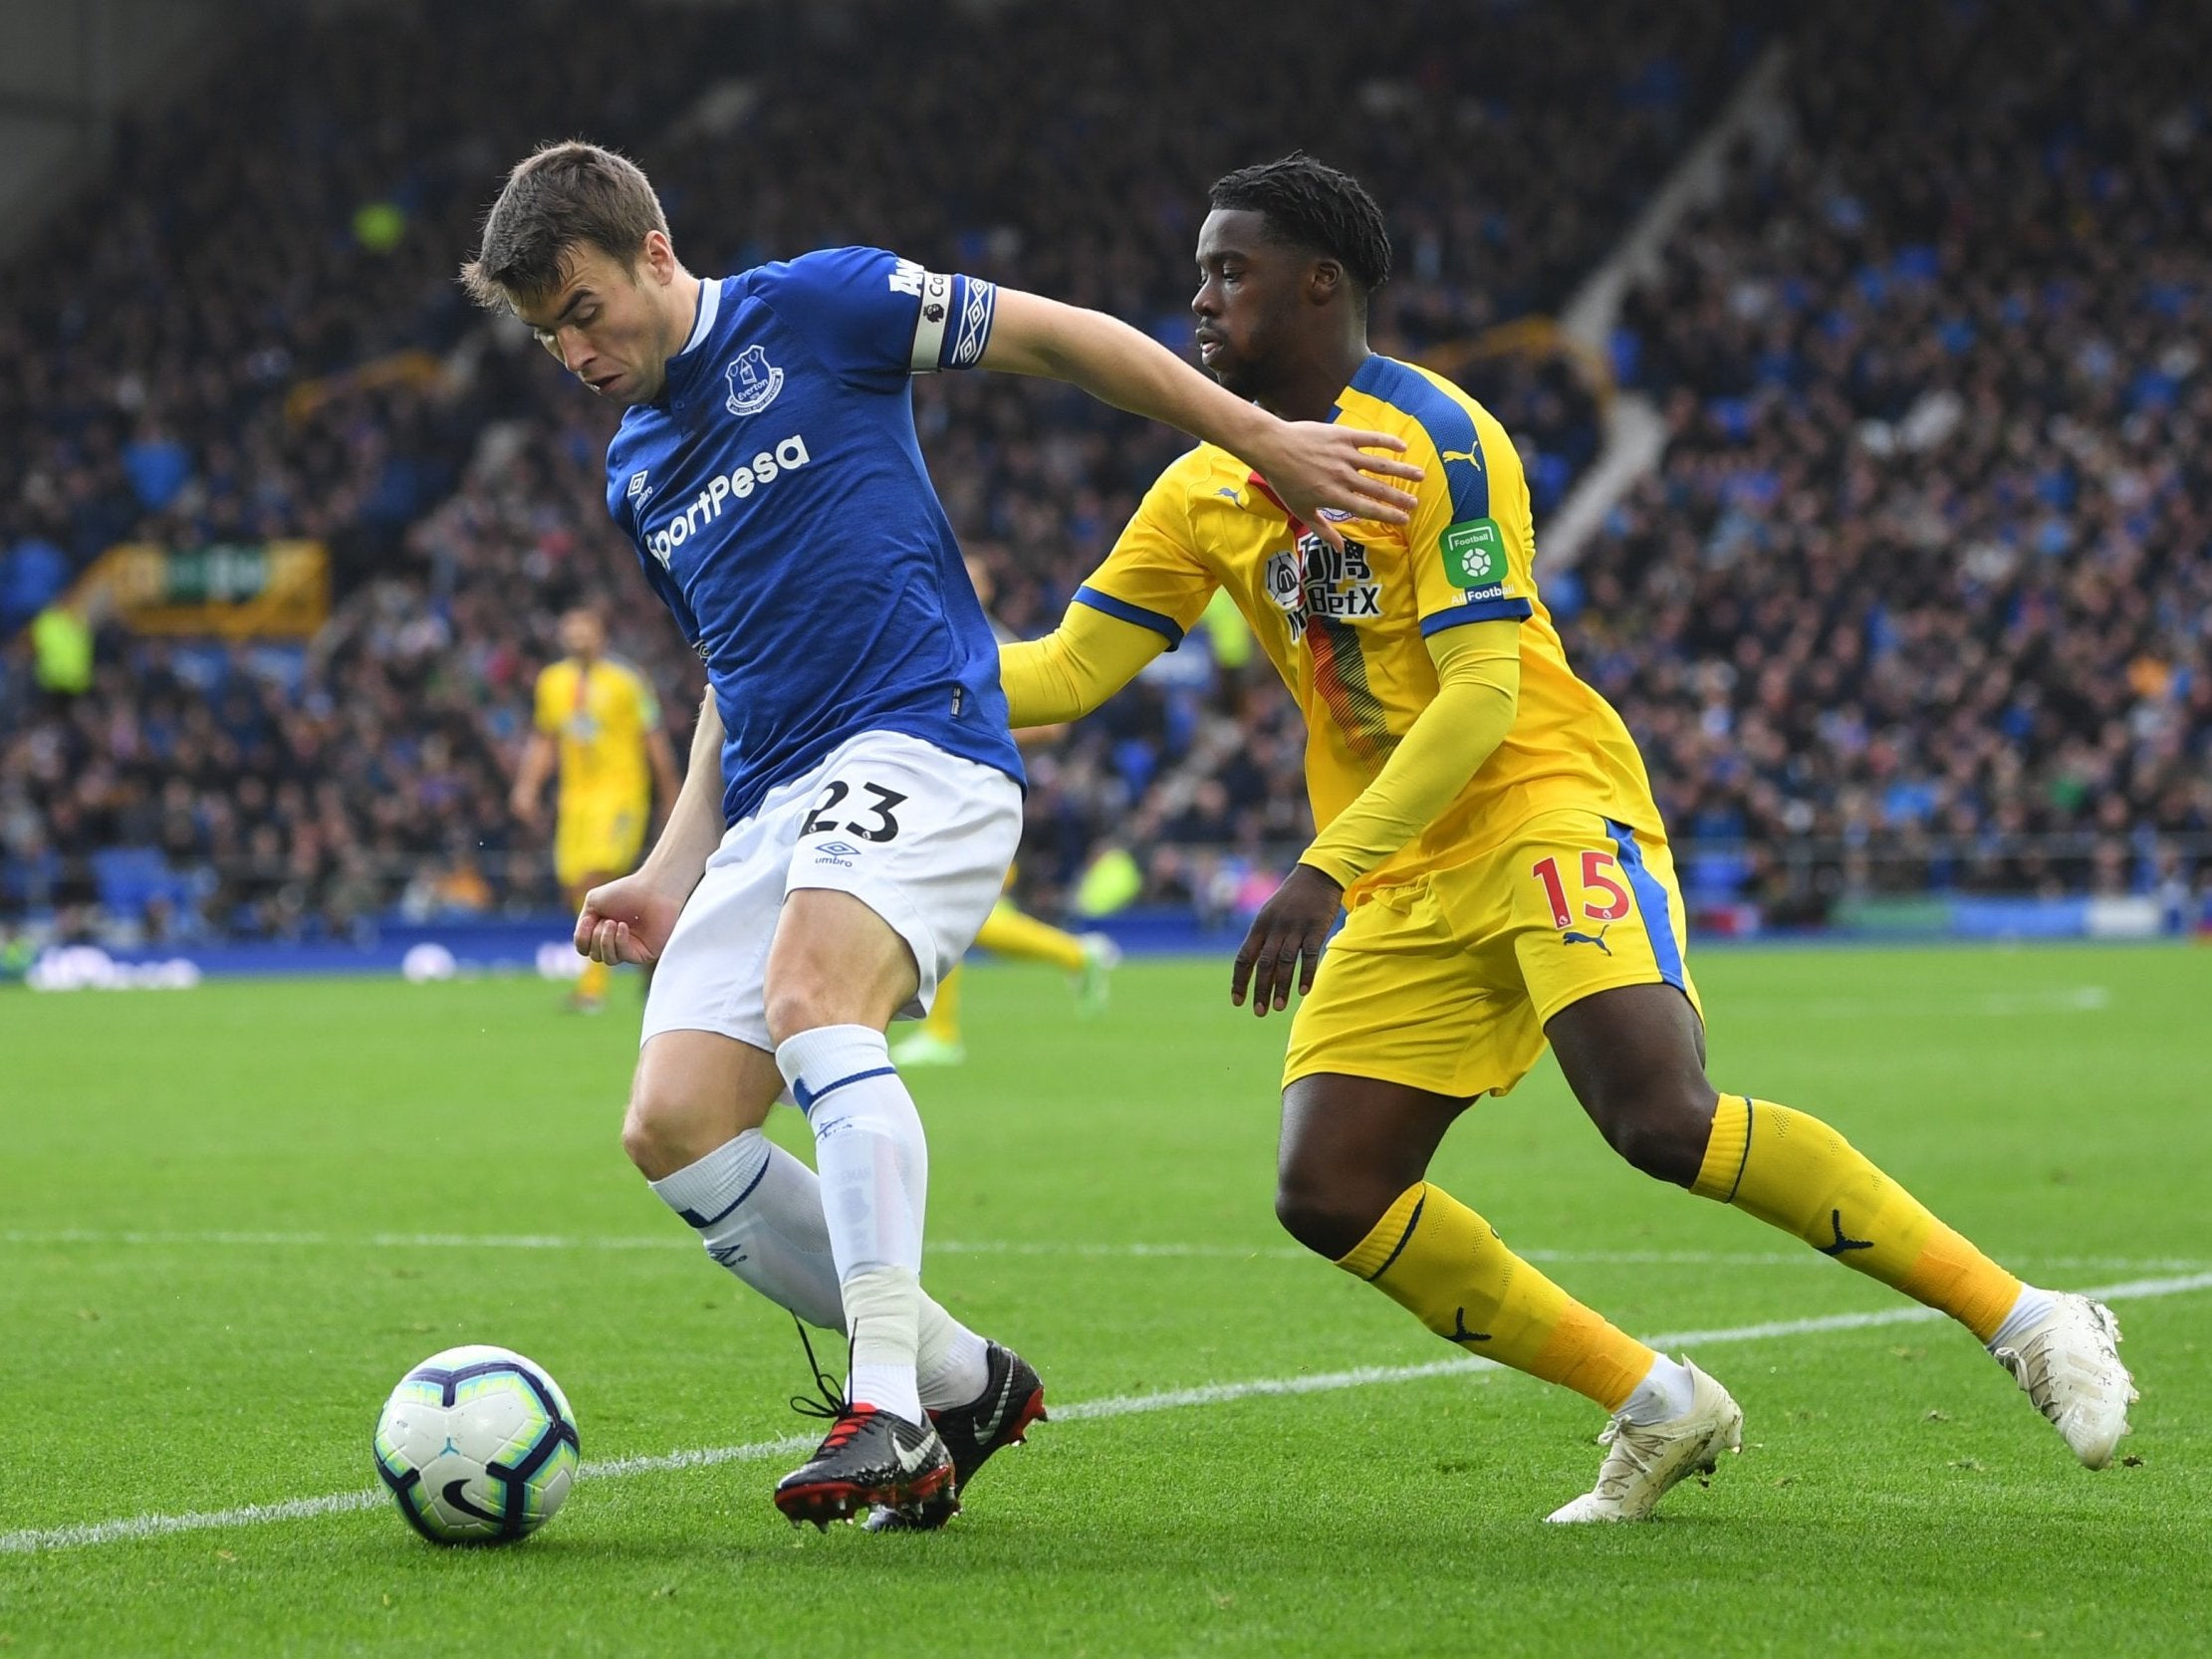 Everton Vs Crystal Palace Result Late Marco Silva Subs Seal Win The Independent The Independent